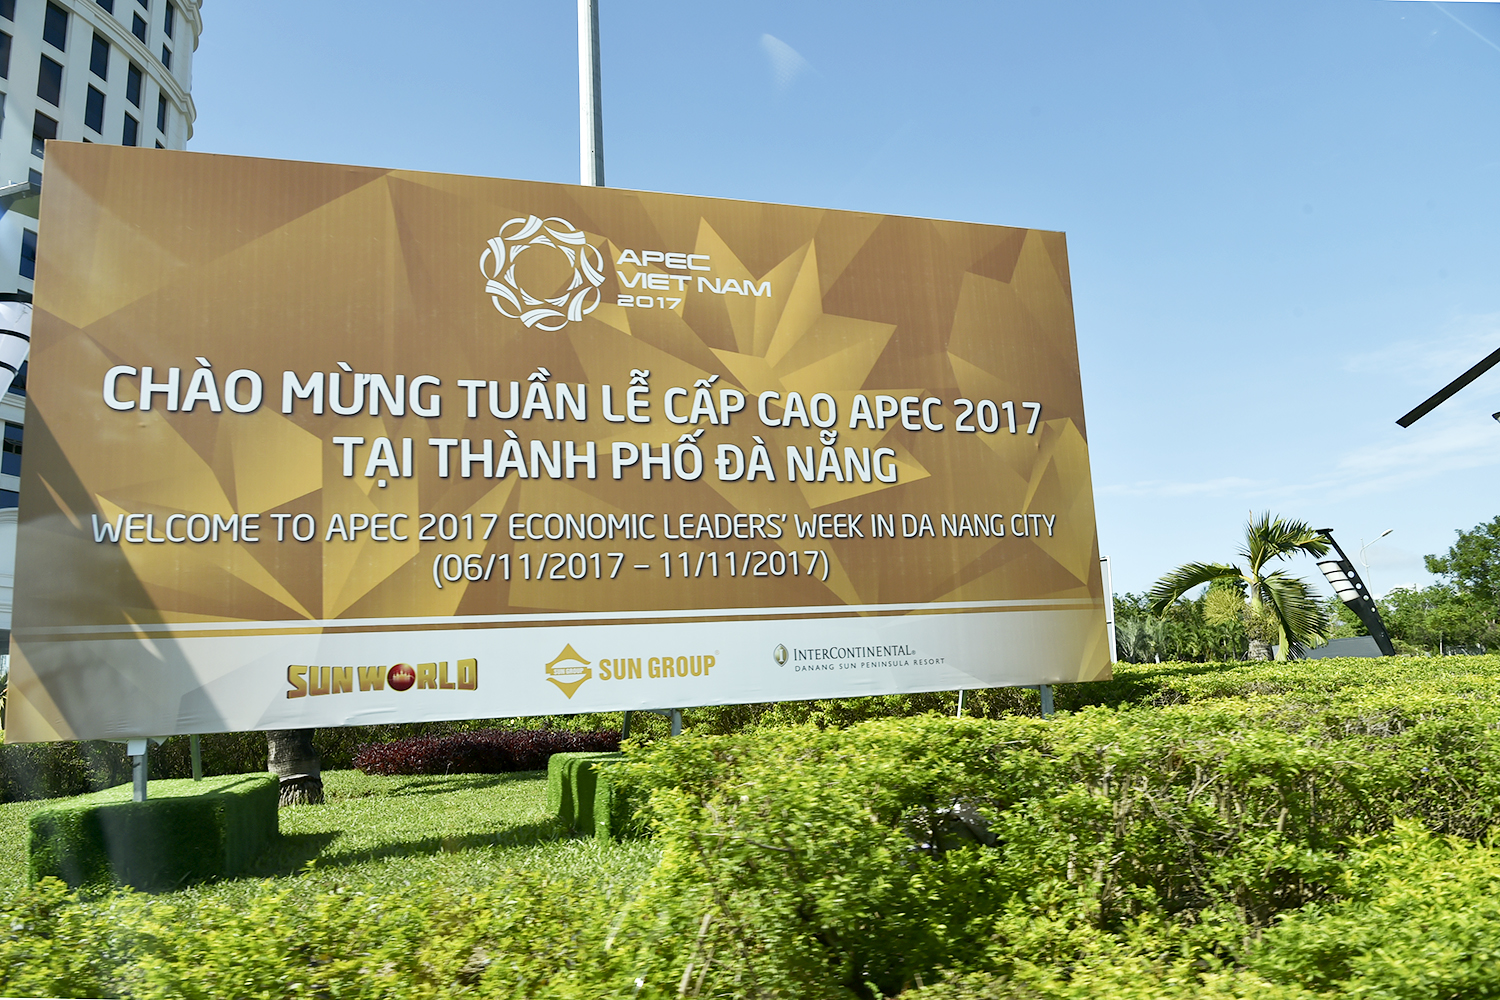 APEC representatives arrive with high expectations to Danang